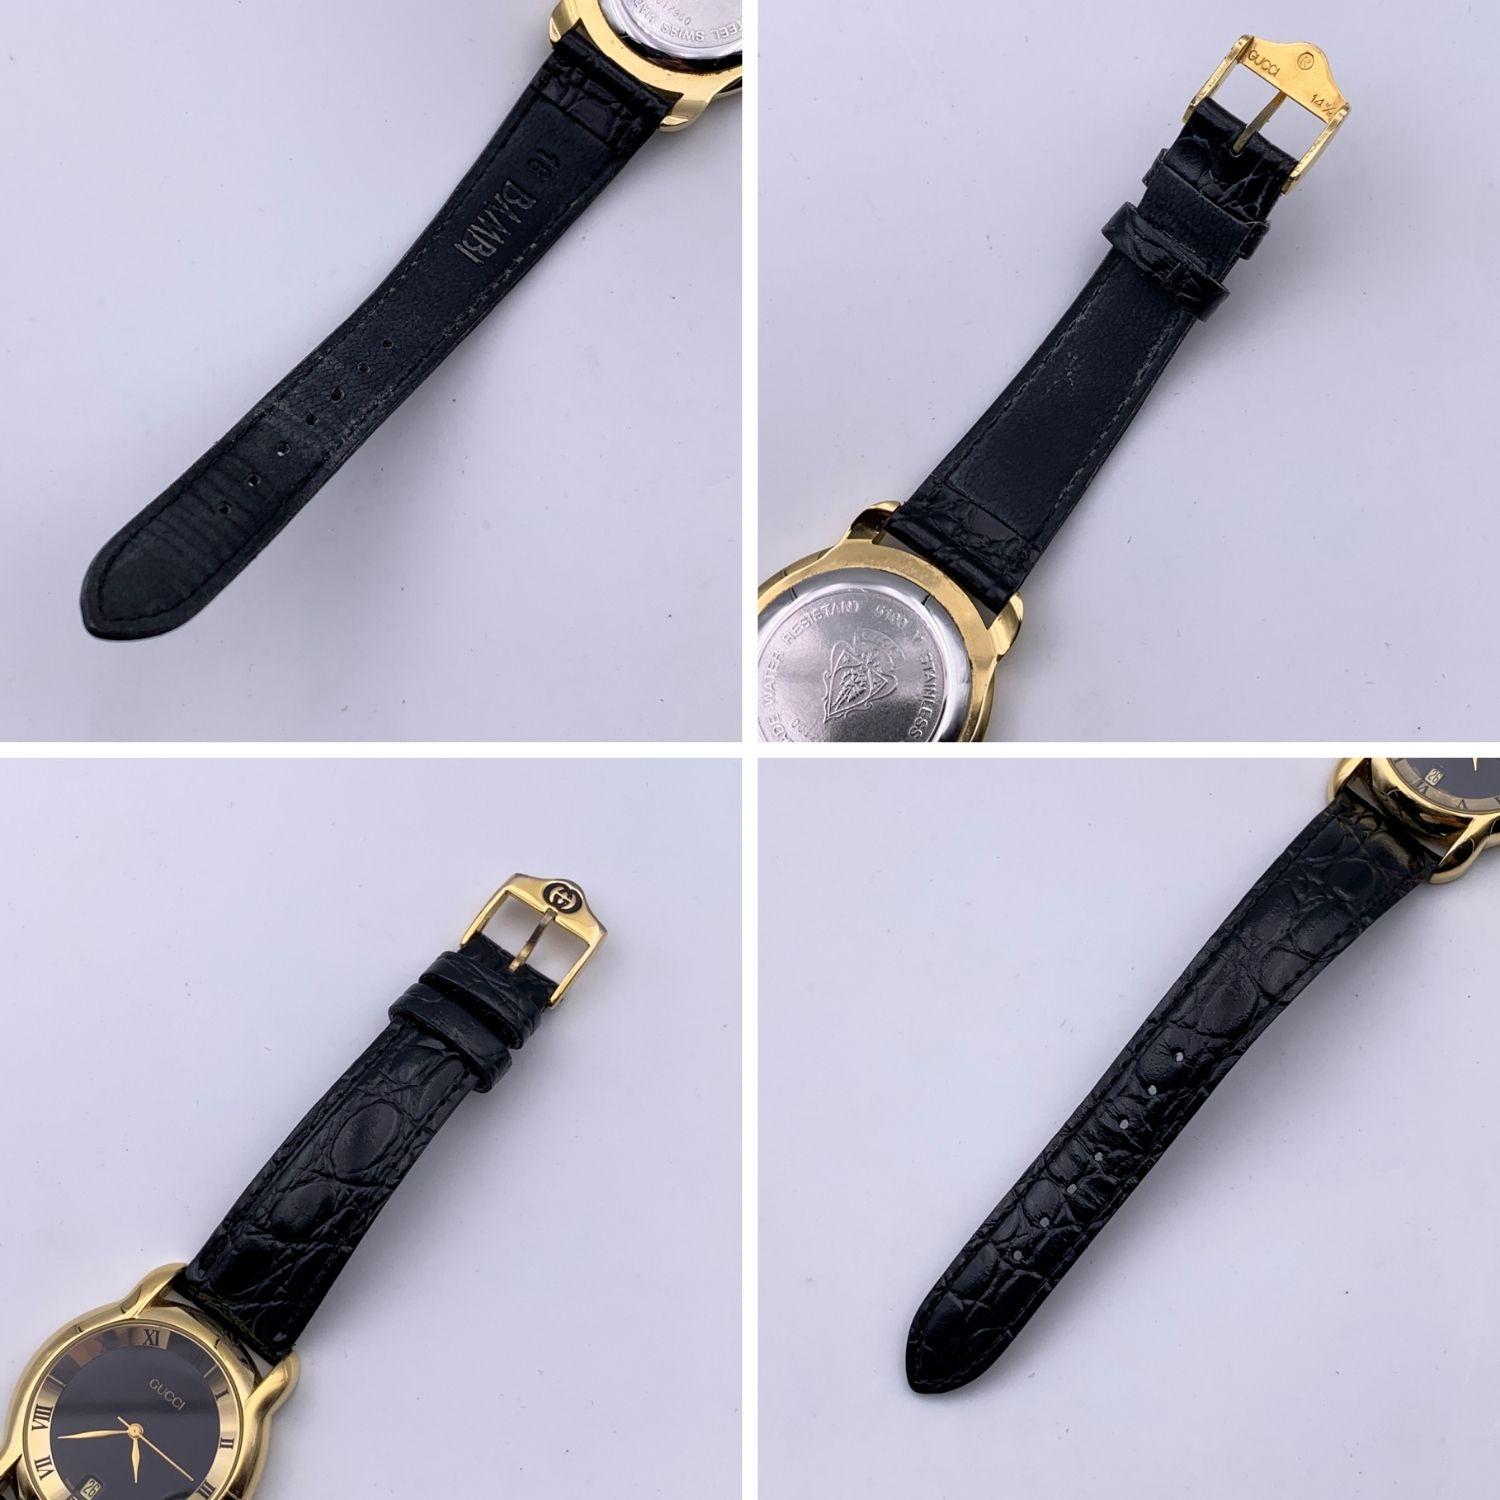 Gucci Vintage Gold Stainless Steel 5100 M Wrist Watch Leather Strap 1